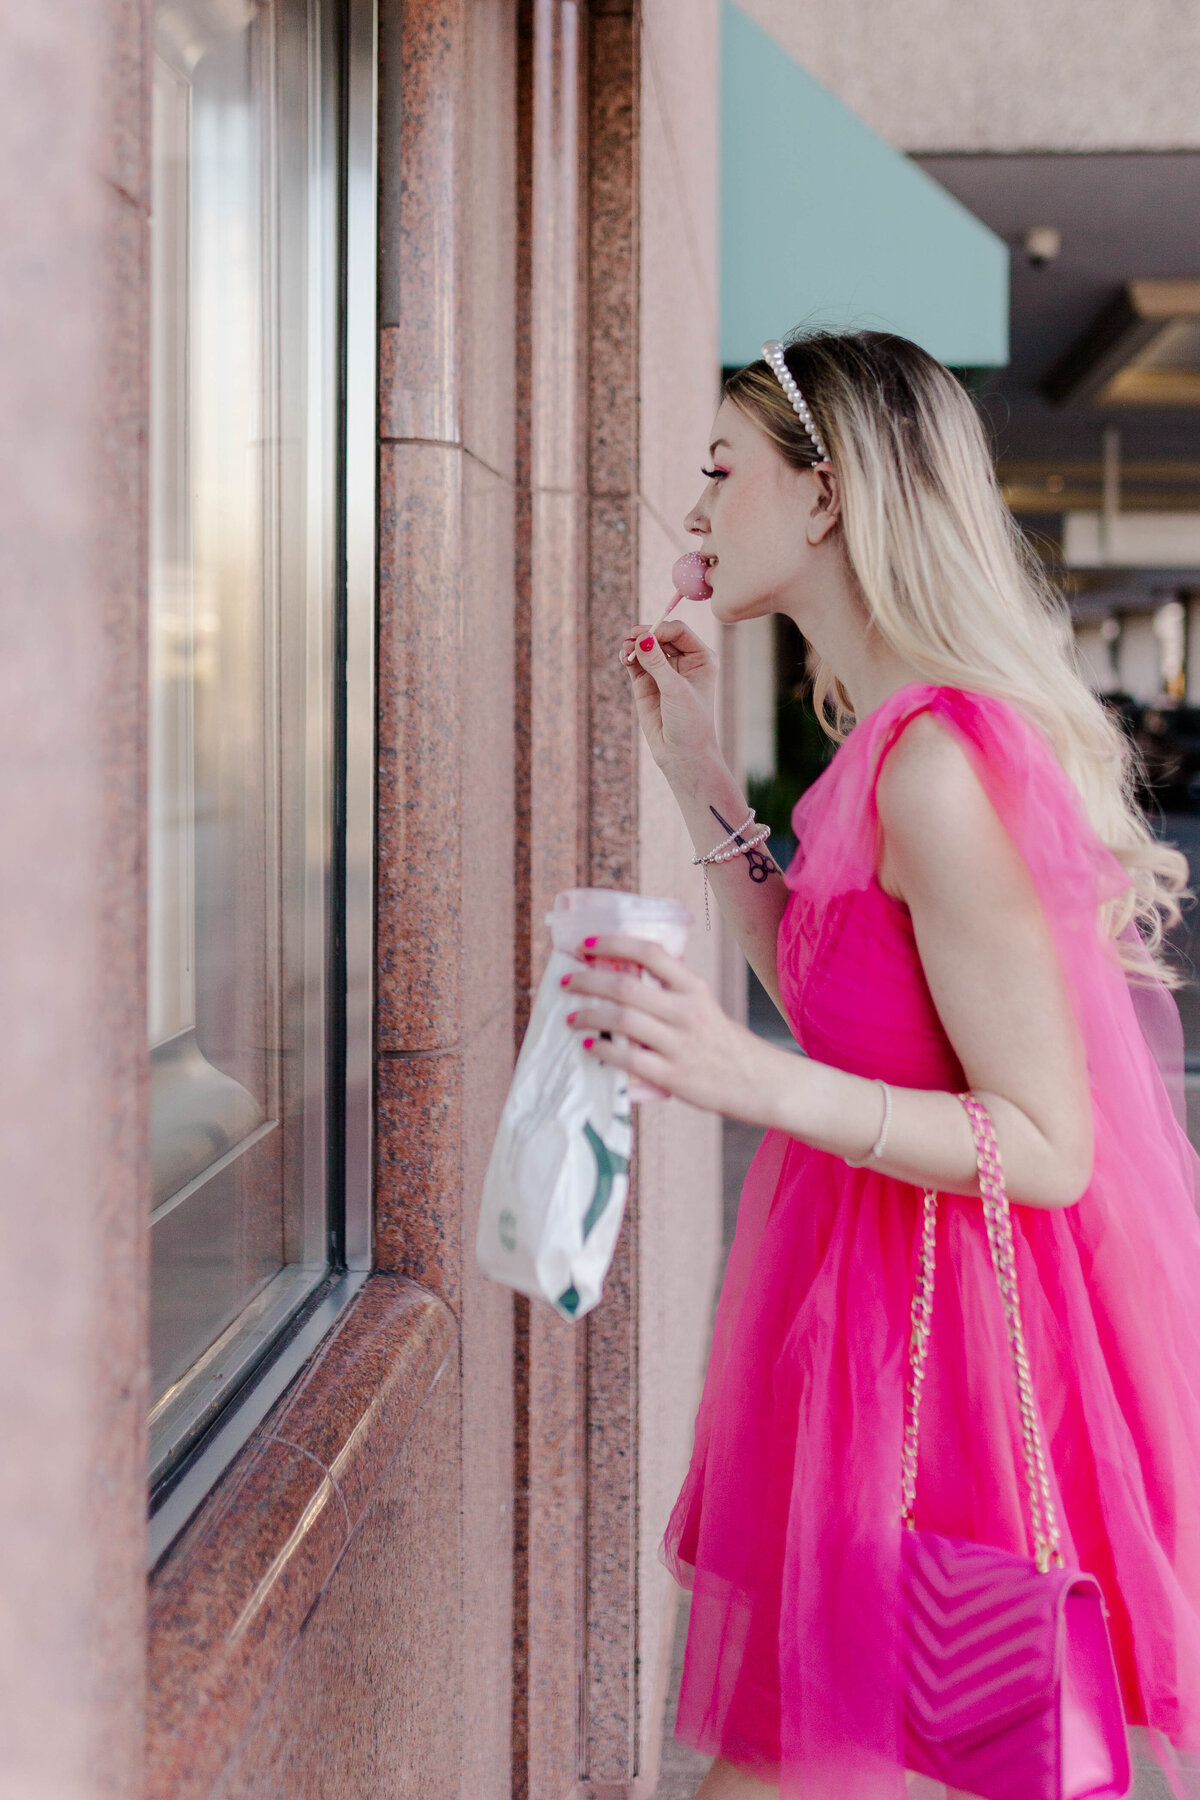 barbie model in pink tulle dress and pink purse holds starbucks coffee and cake pop in a breakfast at tiffany's inspired pose